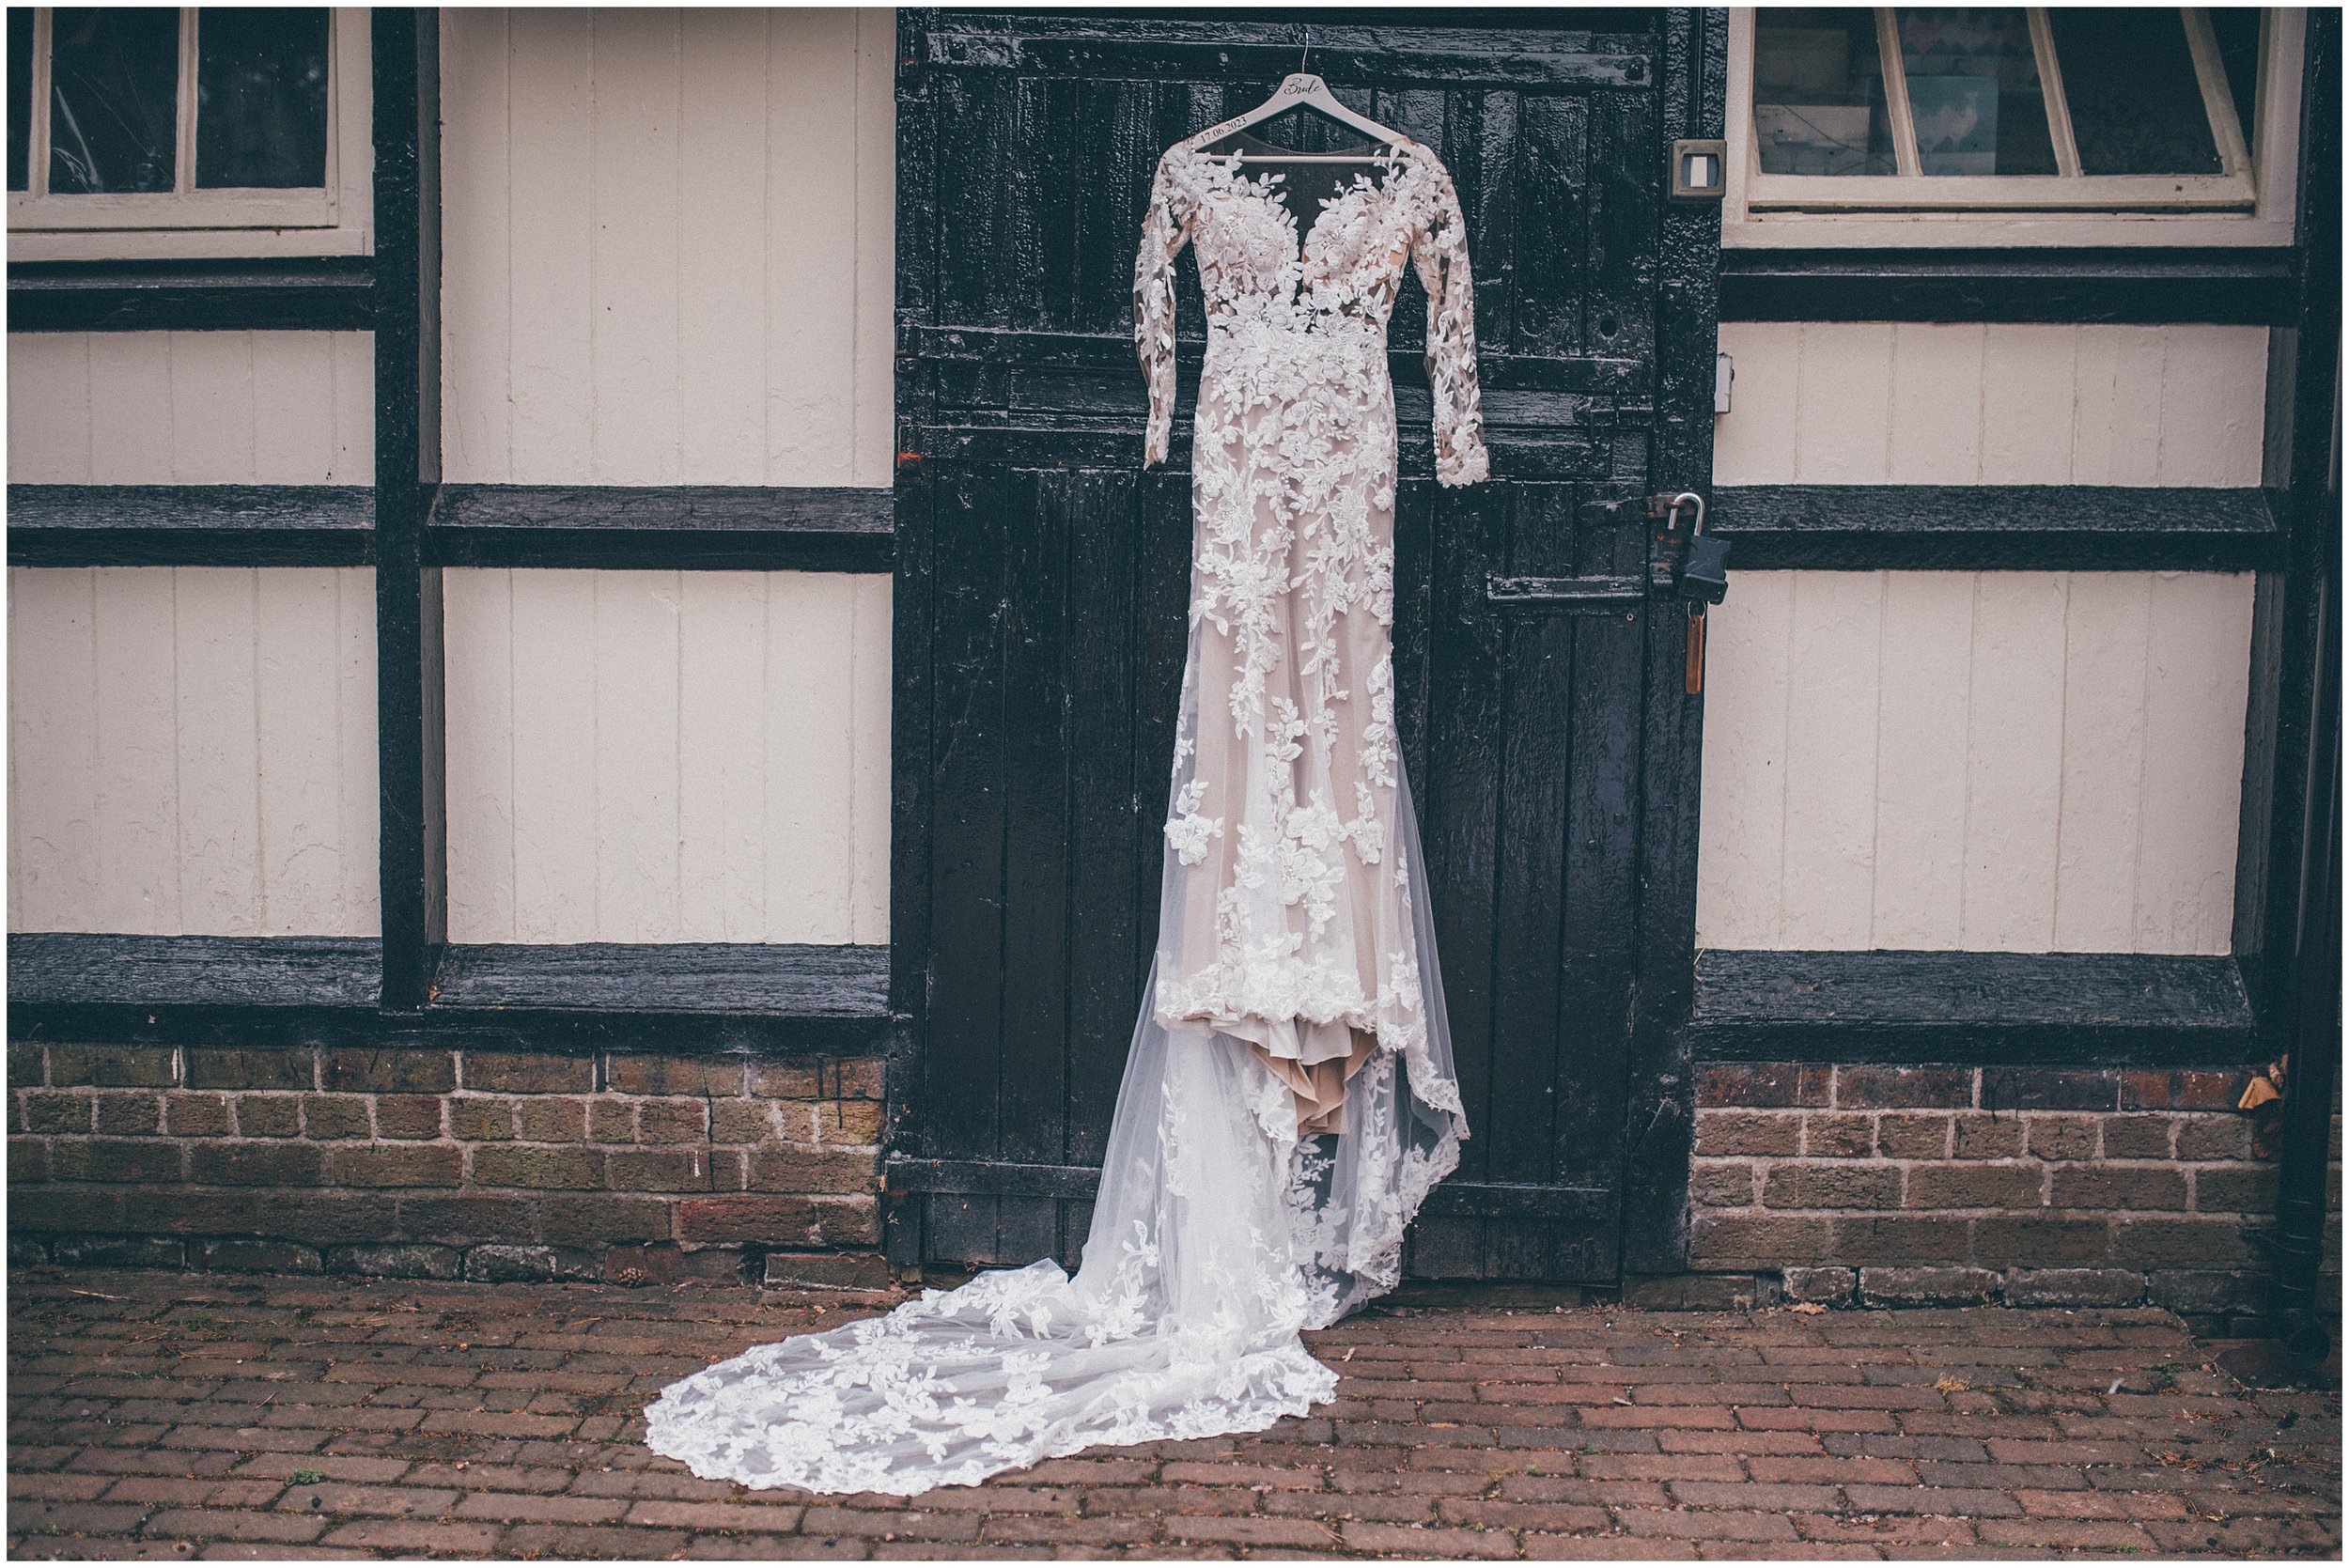 Brides beautiful wedding dress hung up at Abbeywood Estate in Delamere, Cheshire